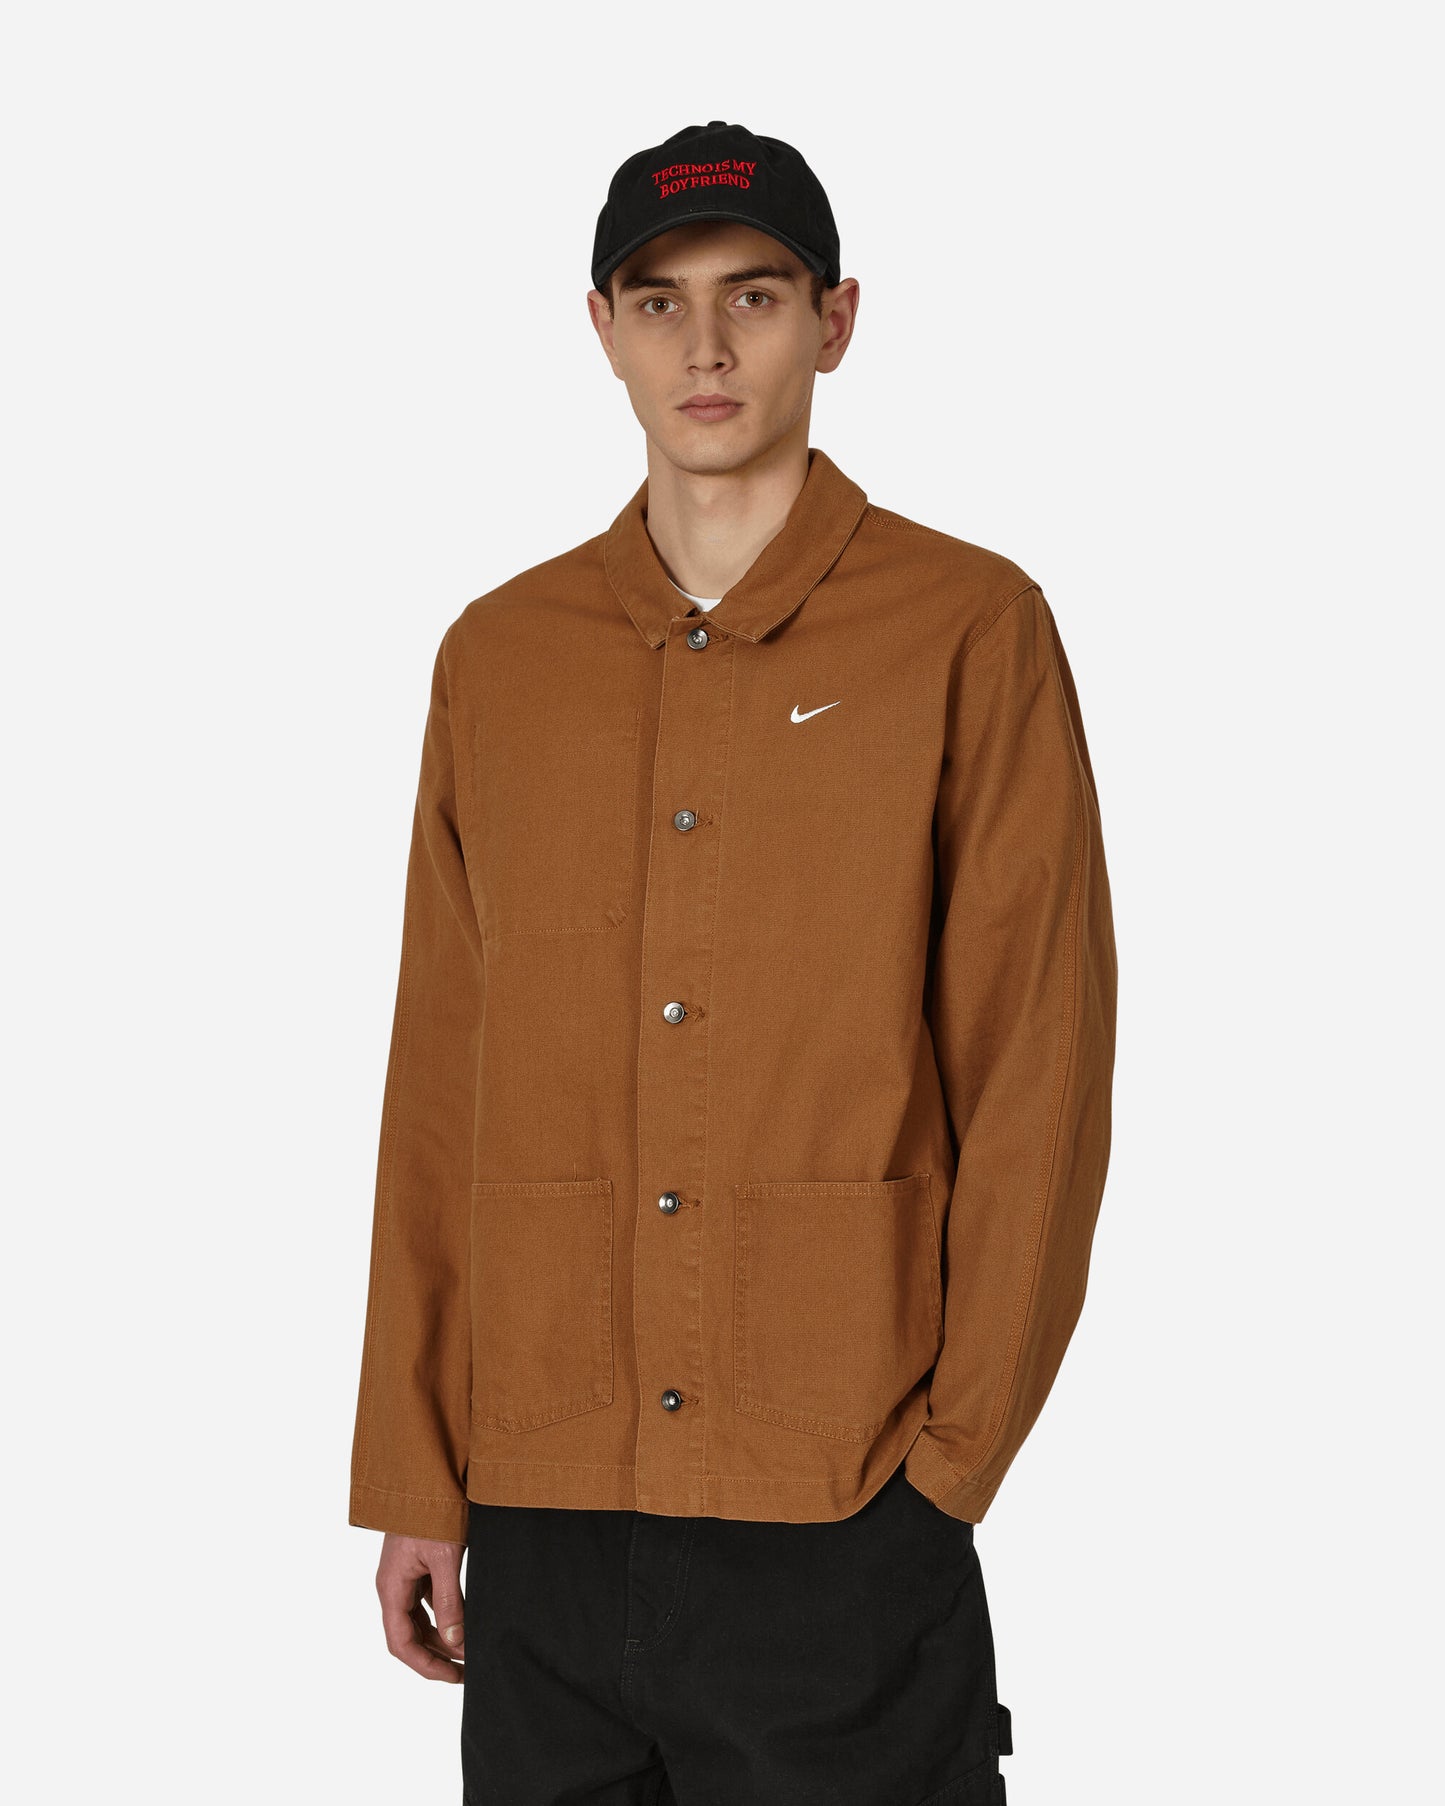 Nike Chore Coat Jkt Ul Ale Brown/White Coats and Jackets Jackets DQ5184-270